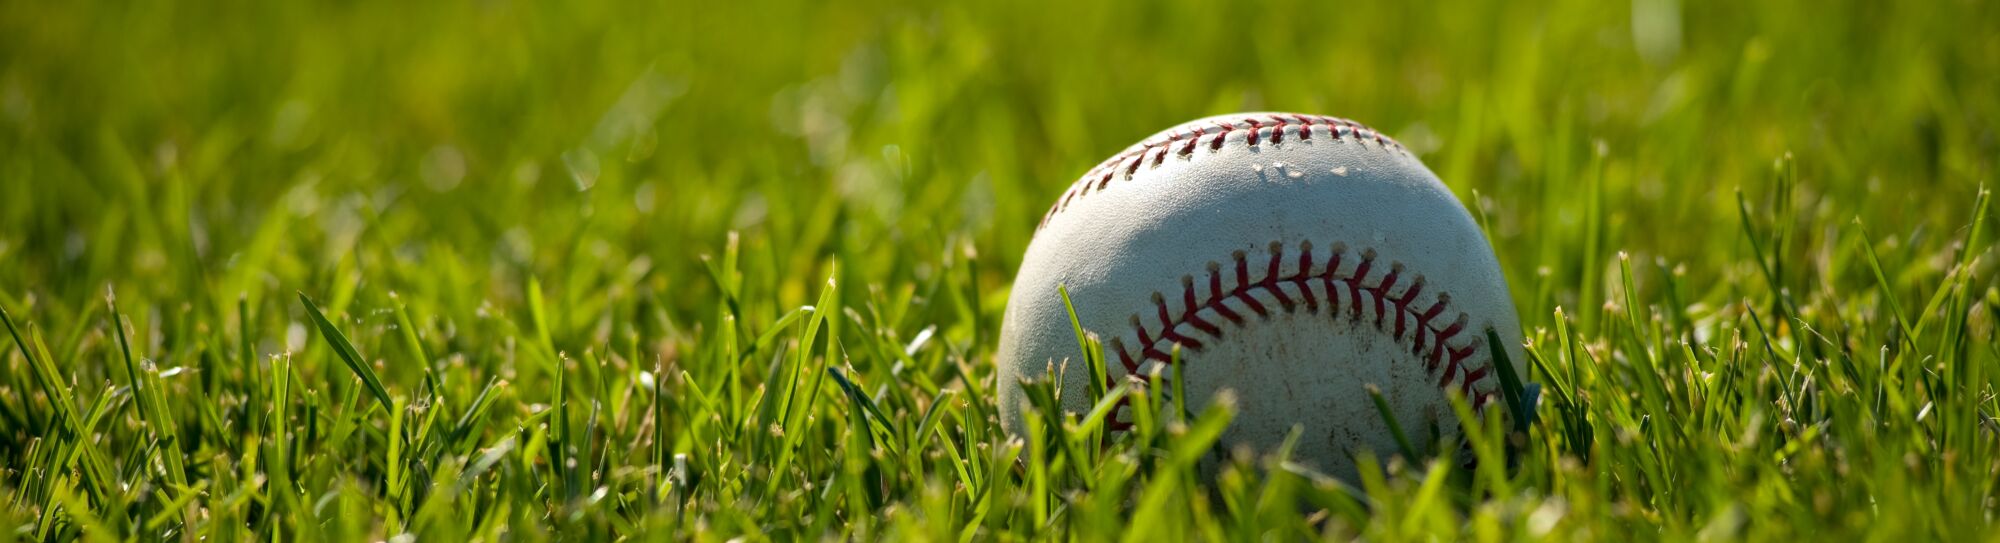 a white leather baseball lying on a baseball field with green grass with copy space